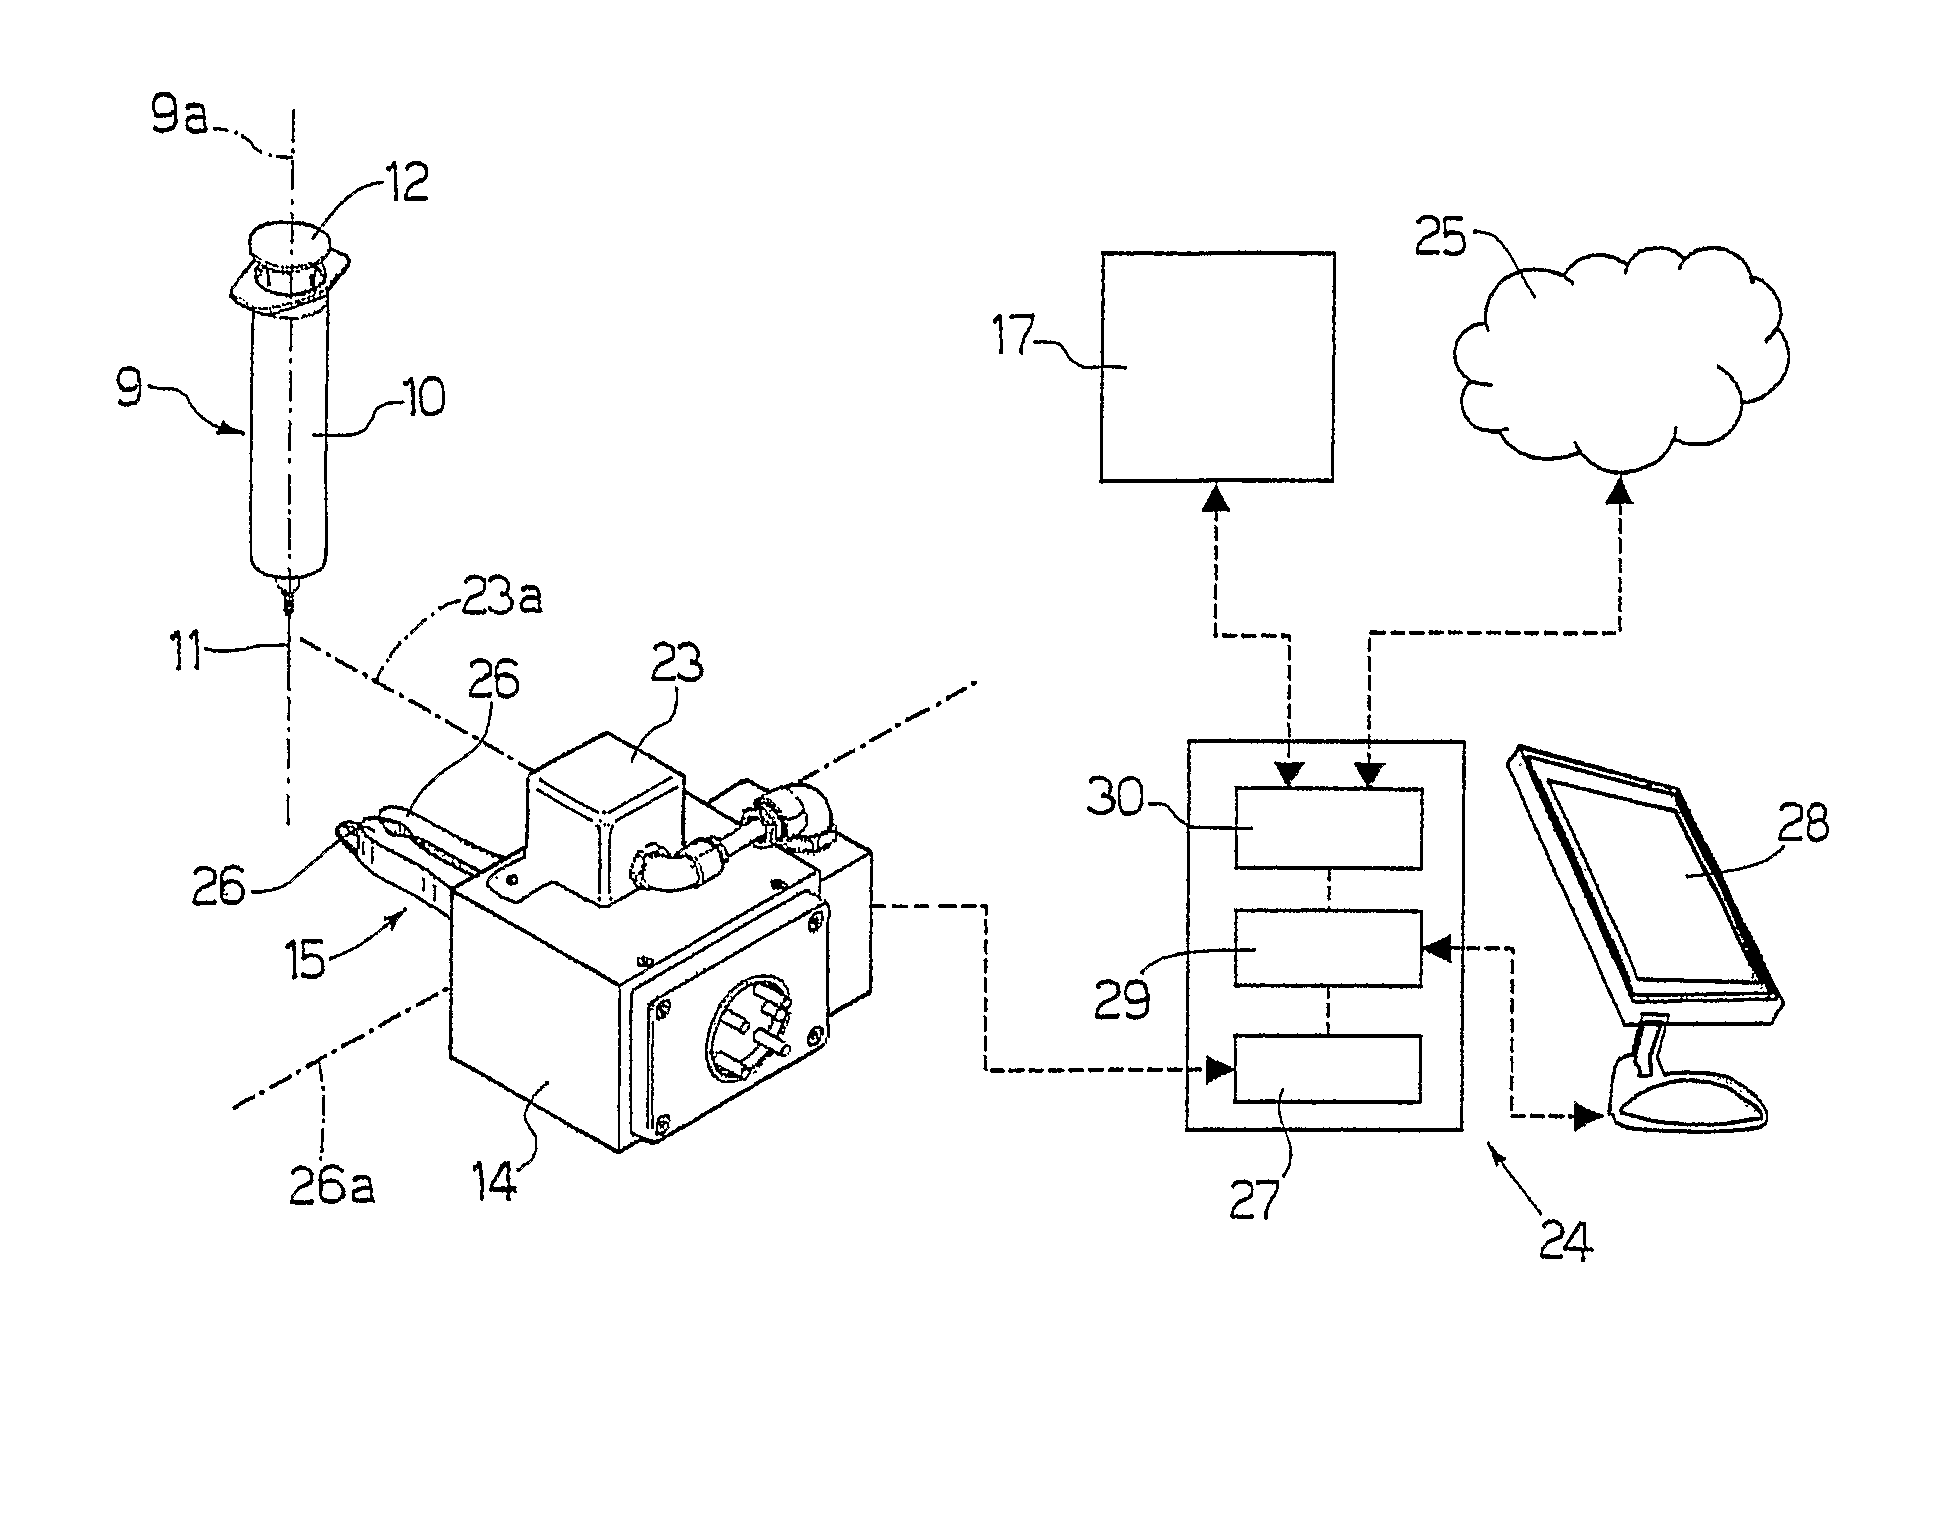 Method and machine for manipulating toxic substances